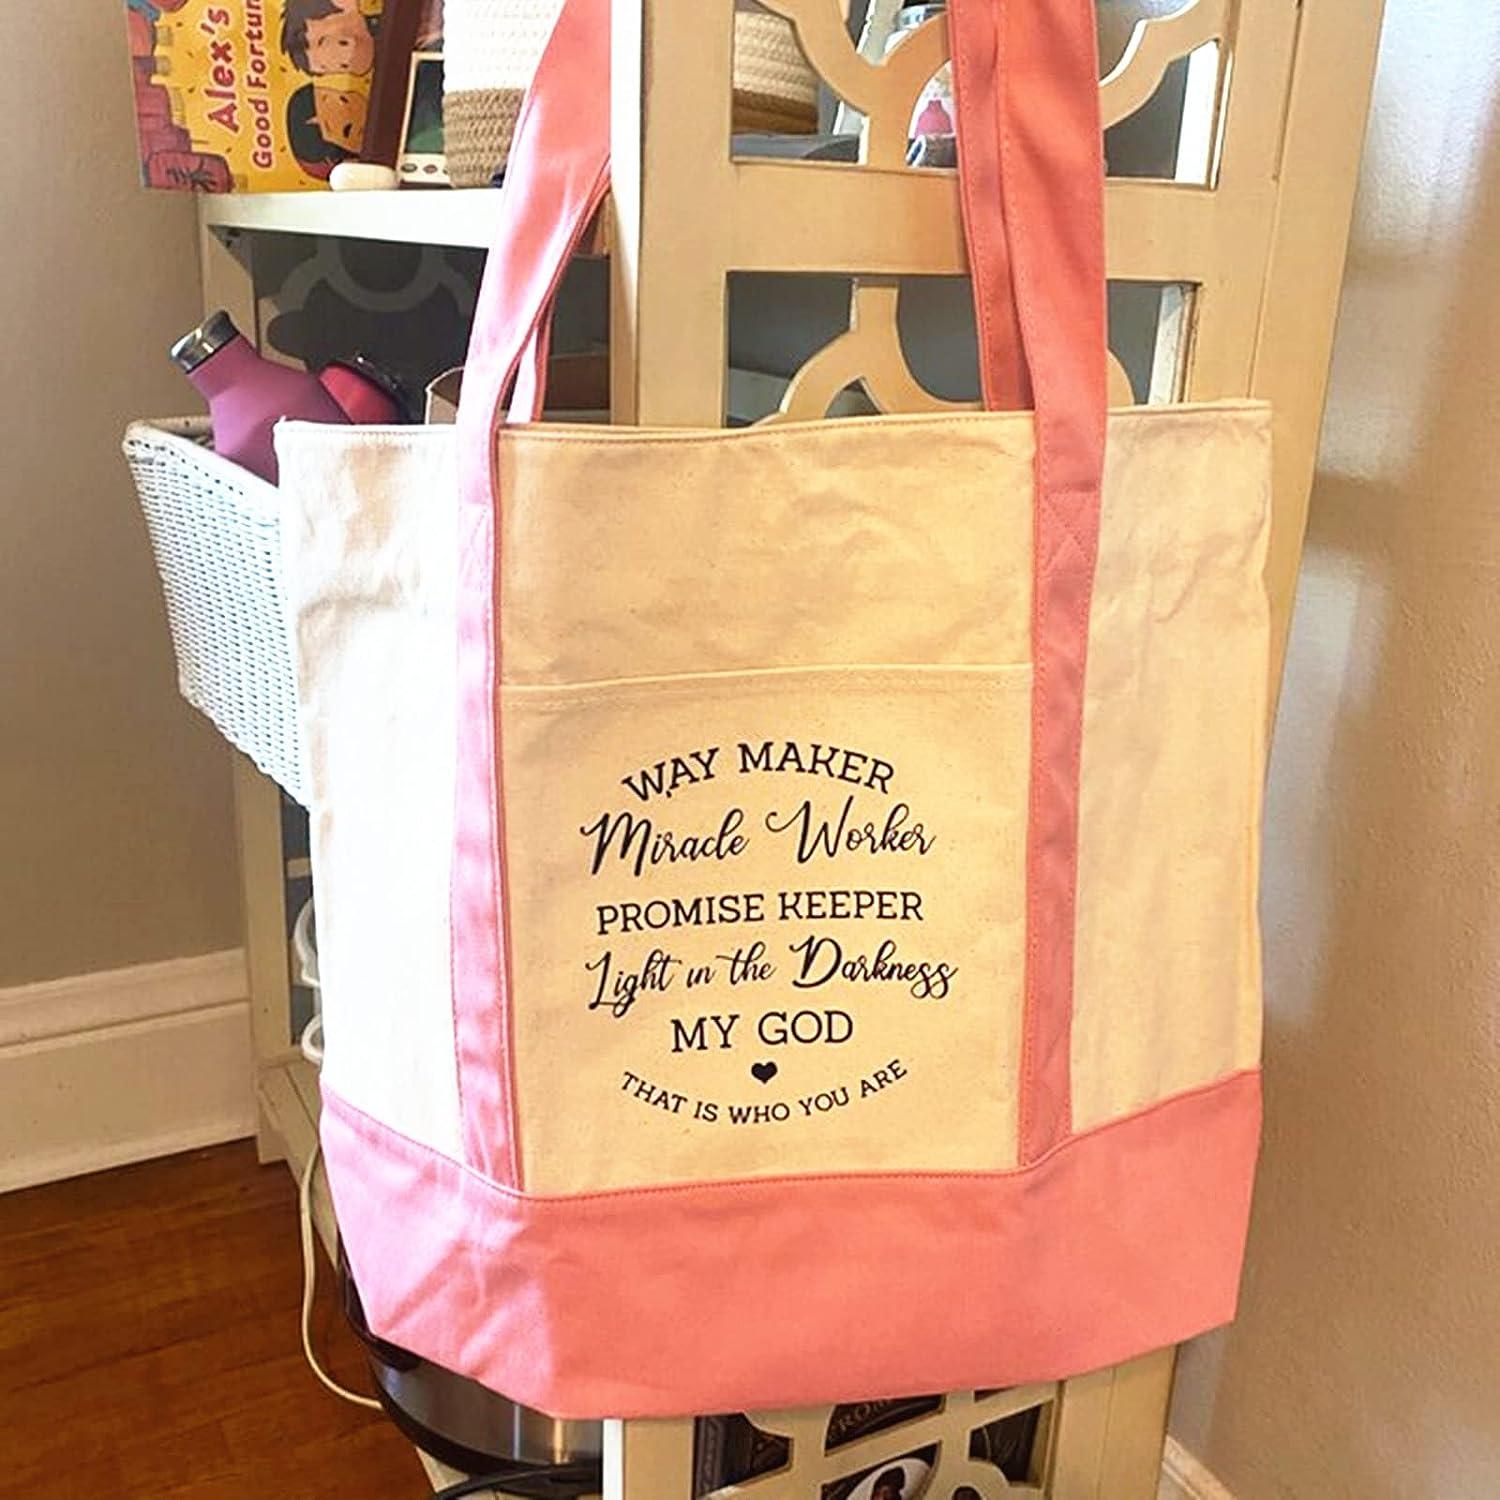 Way Maker Miracle Worker Promise Keeper My God' Reusable Gift Bag